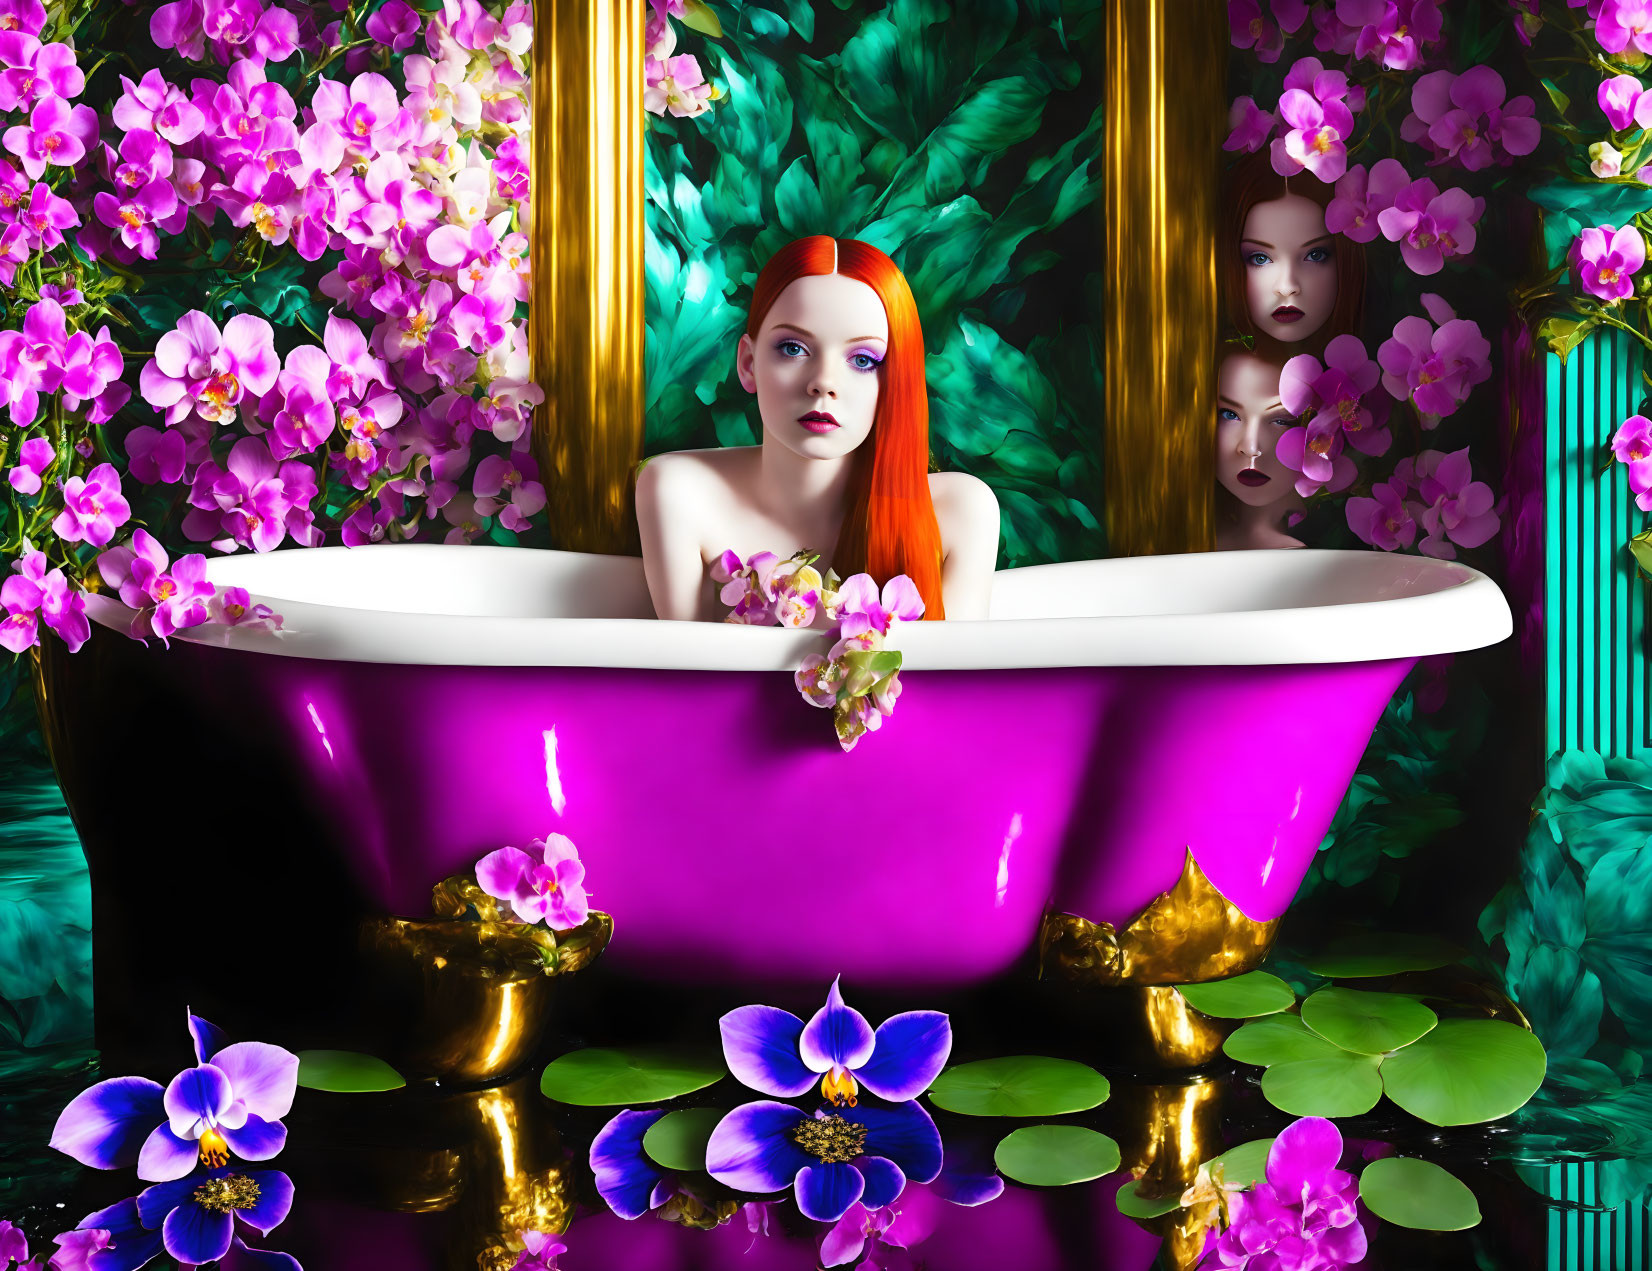 Red-haired woman in purple bathtub with greenery and pink flowers.